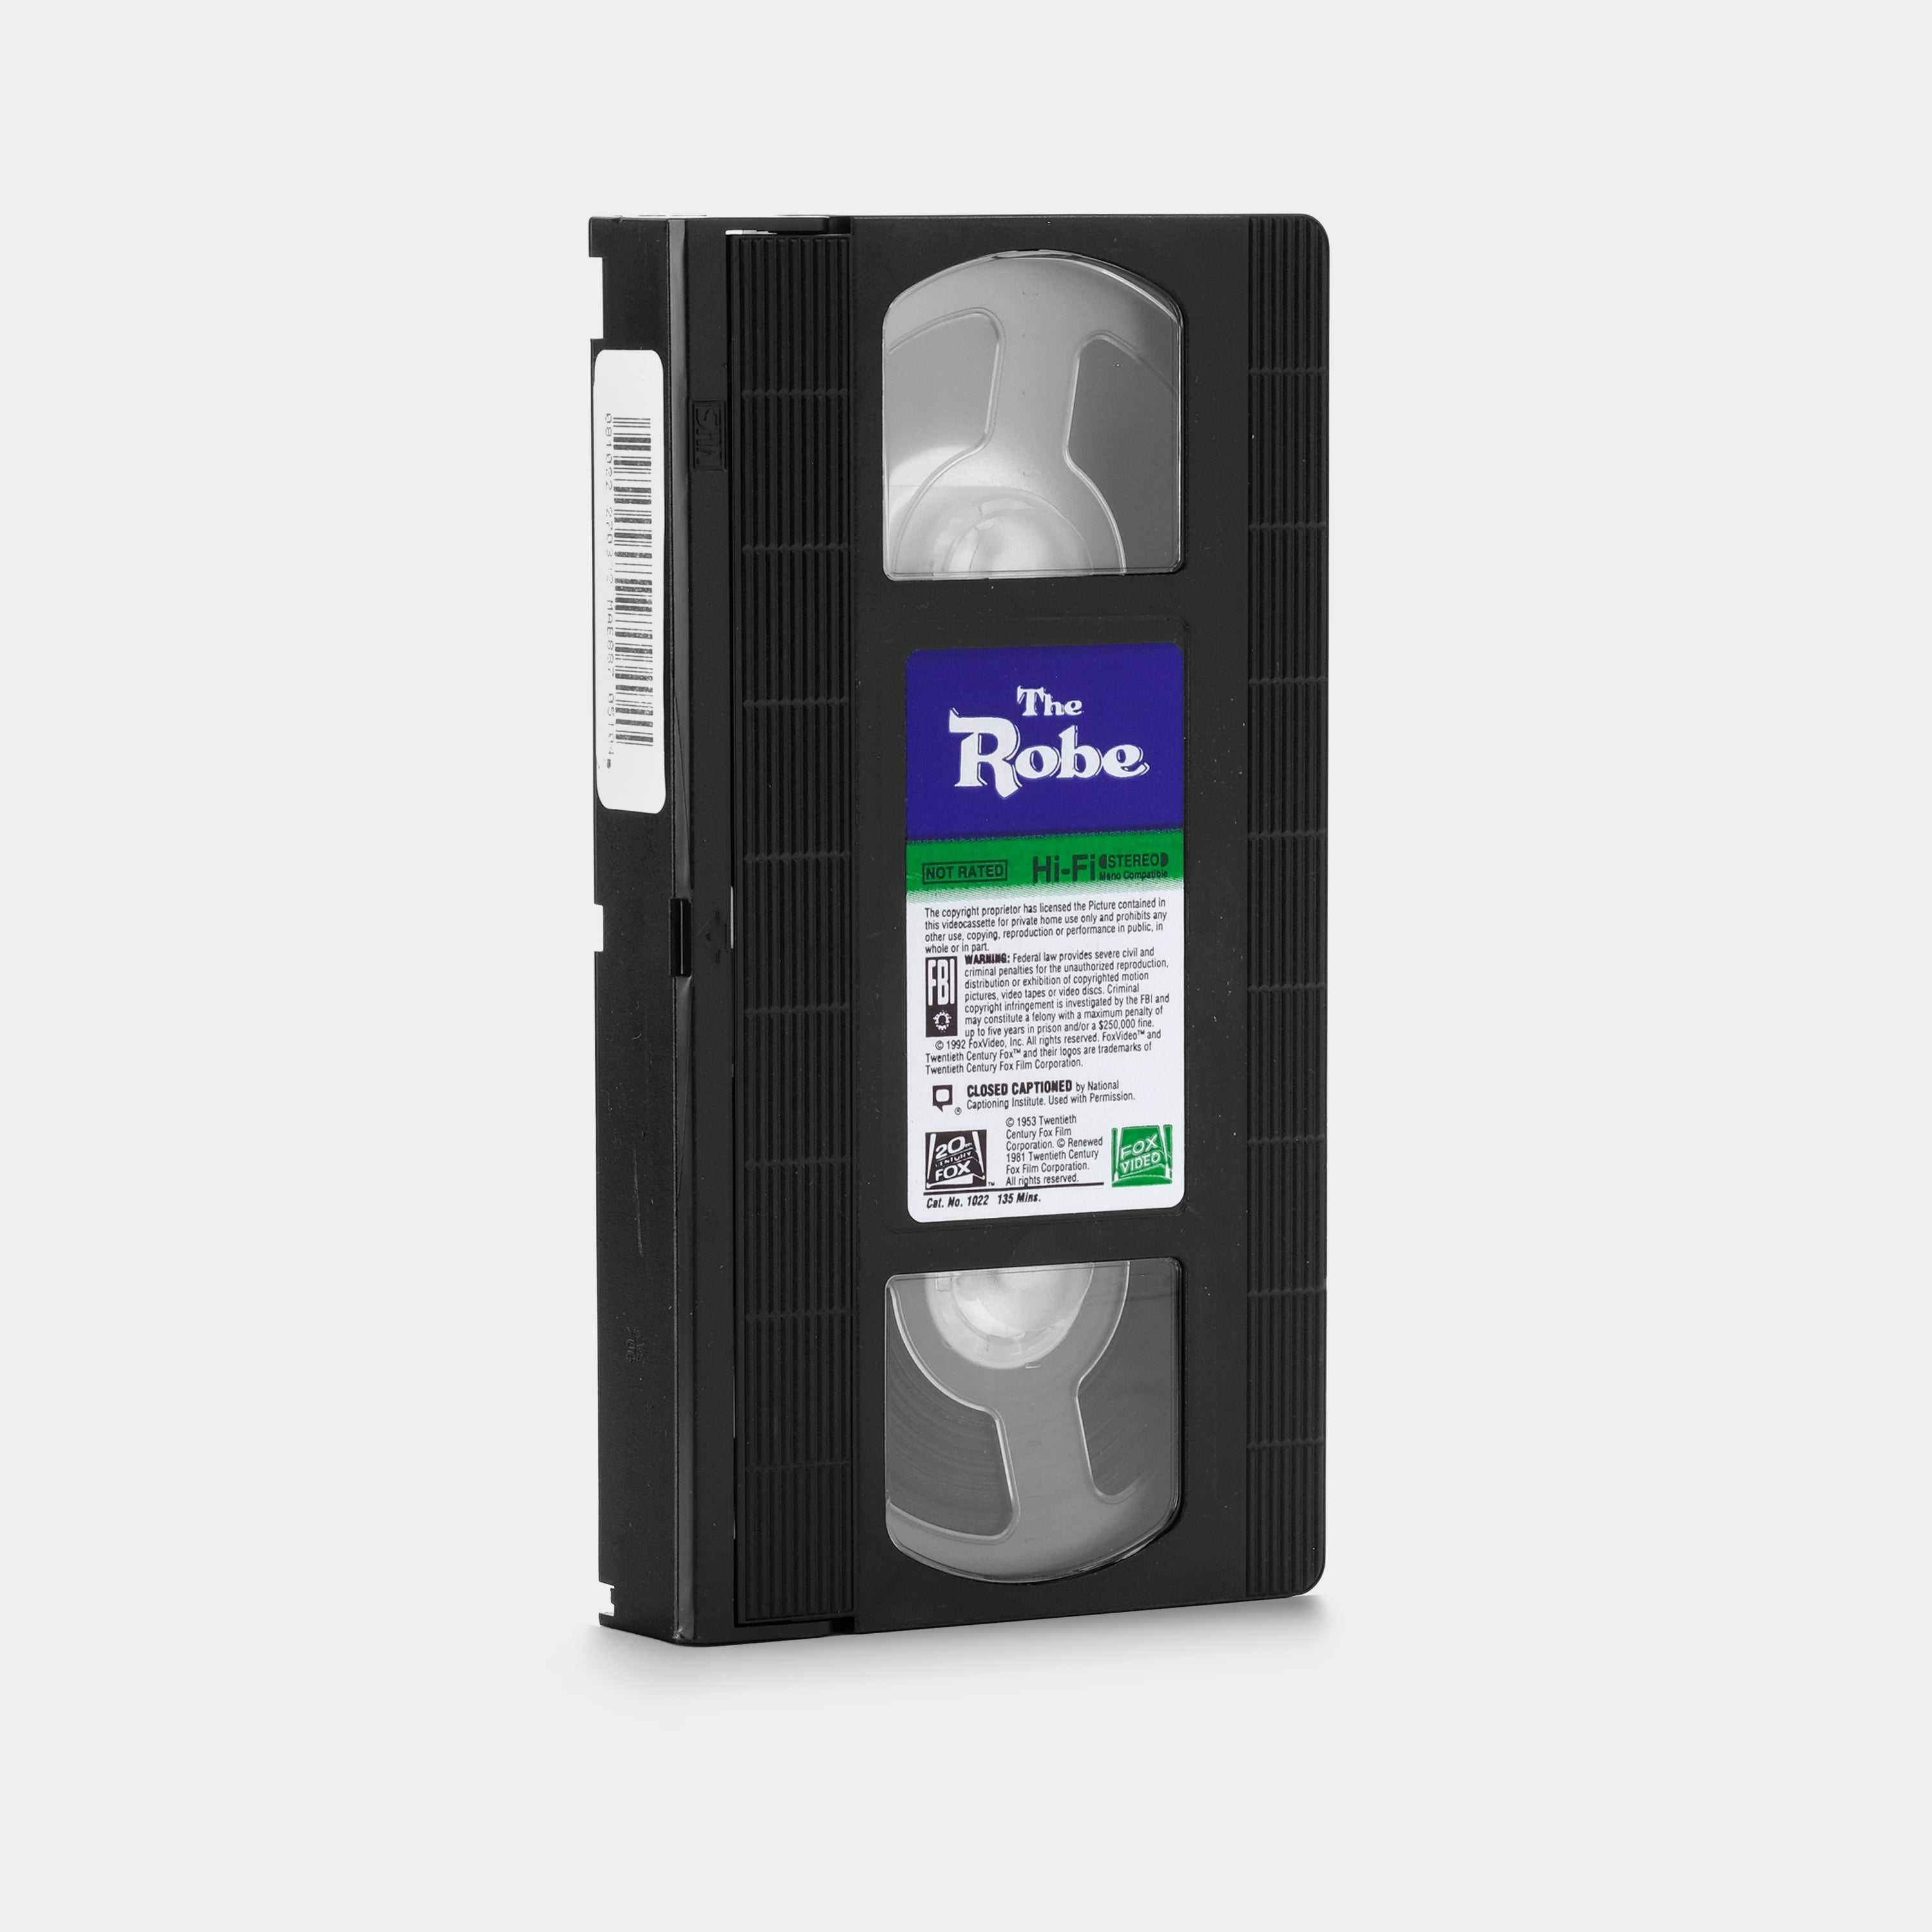 The Robe VHS Tape